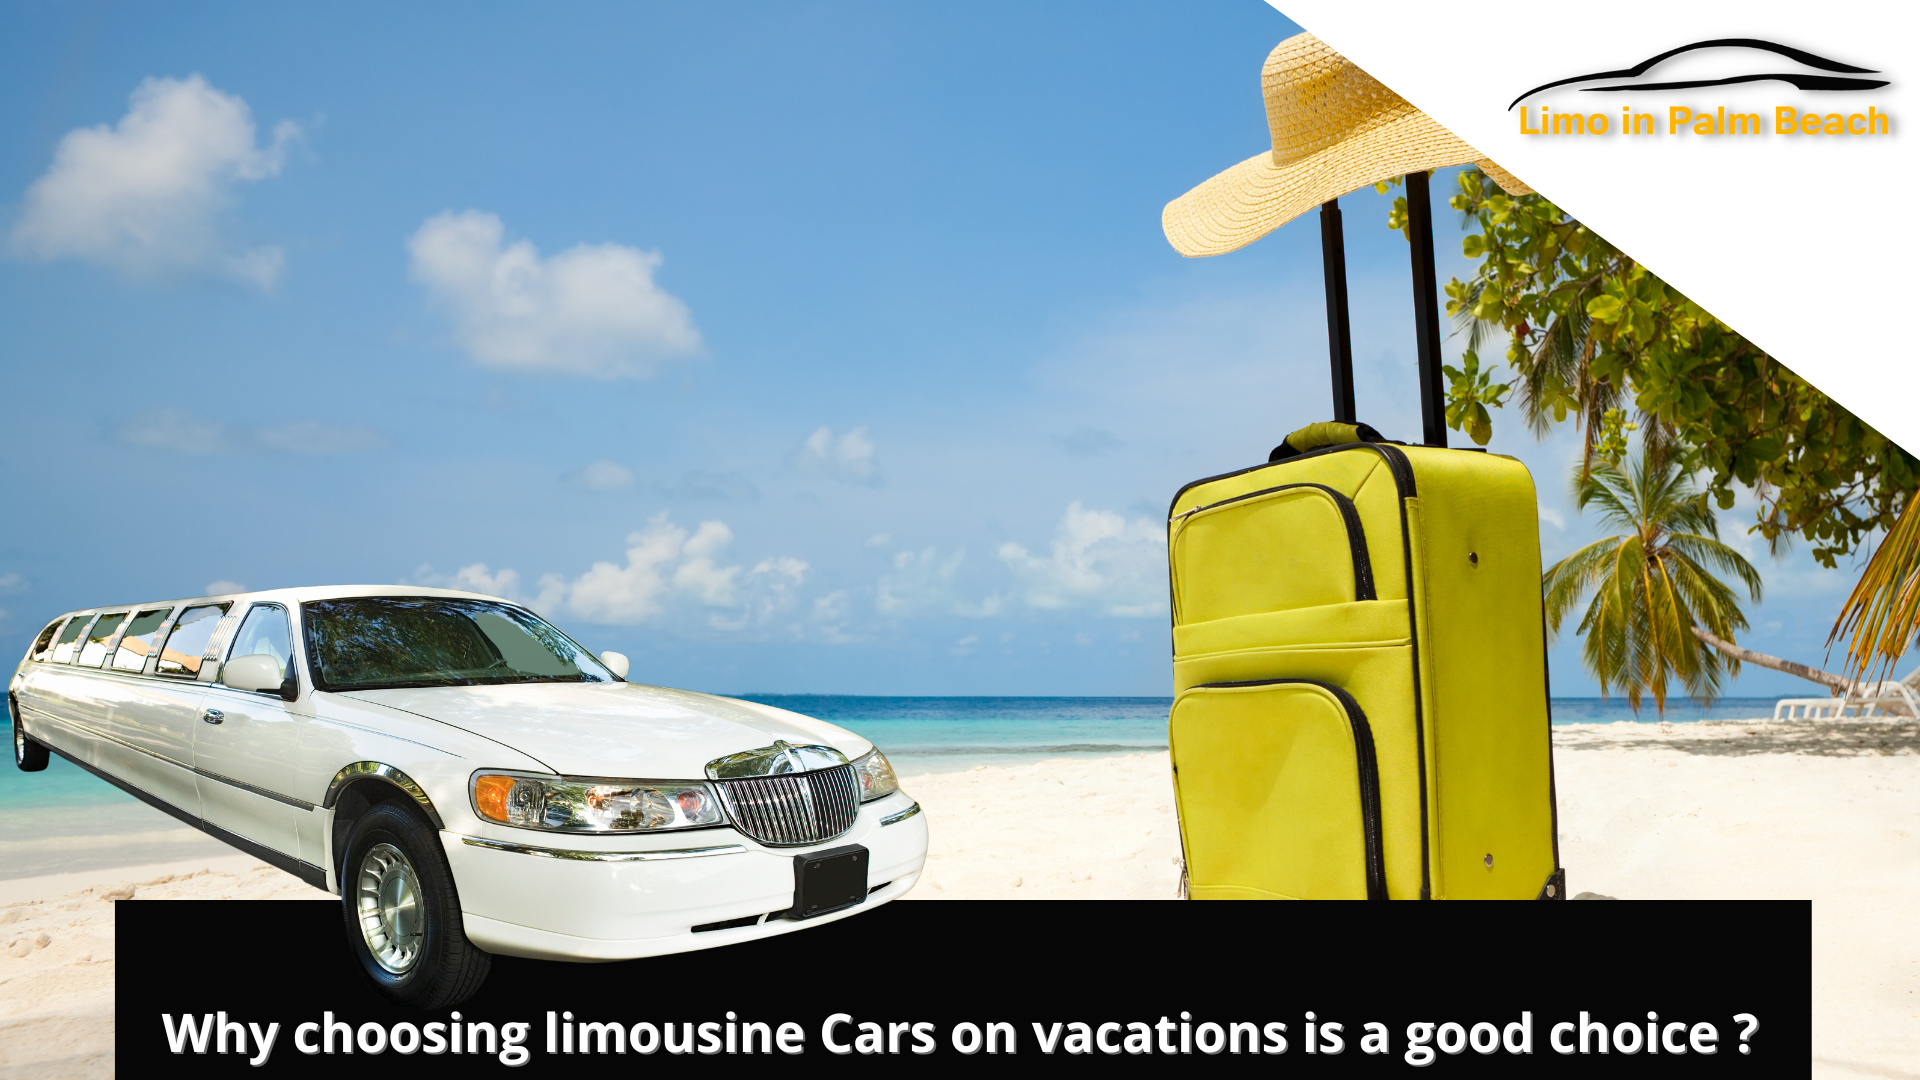 Why choosing limousine Cars on vacations is a good choice?￼